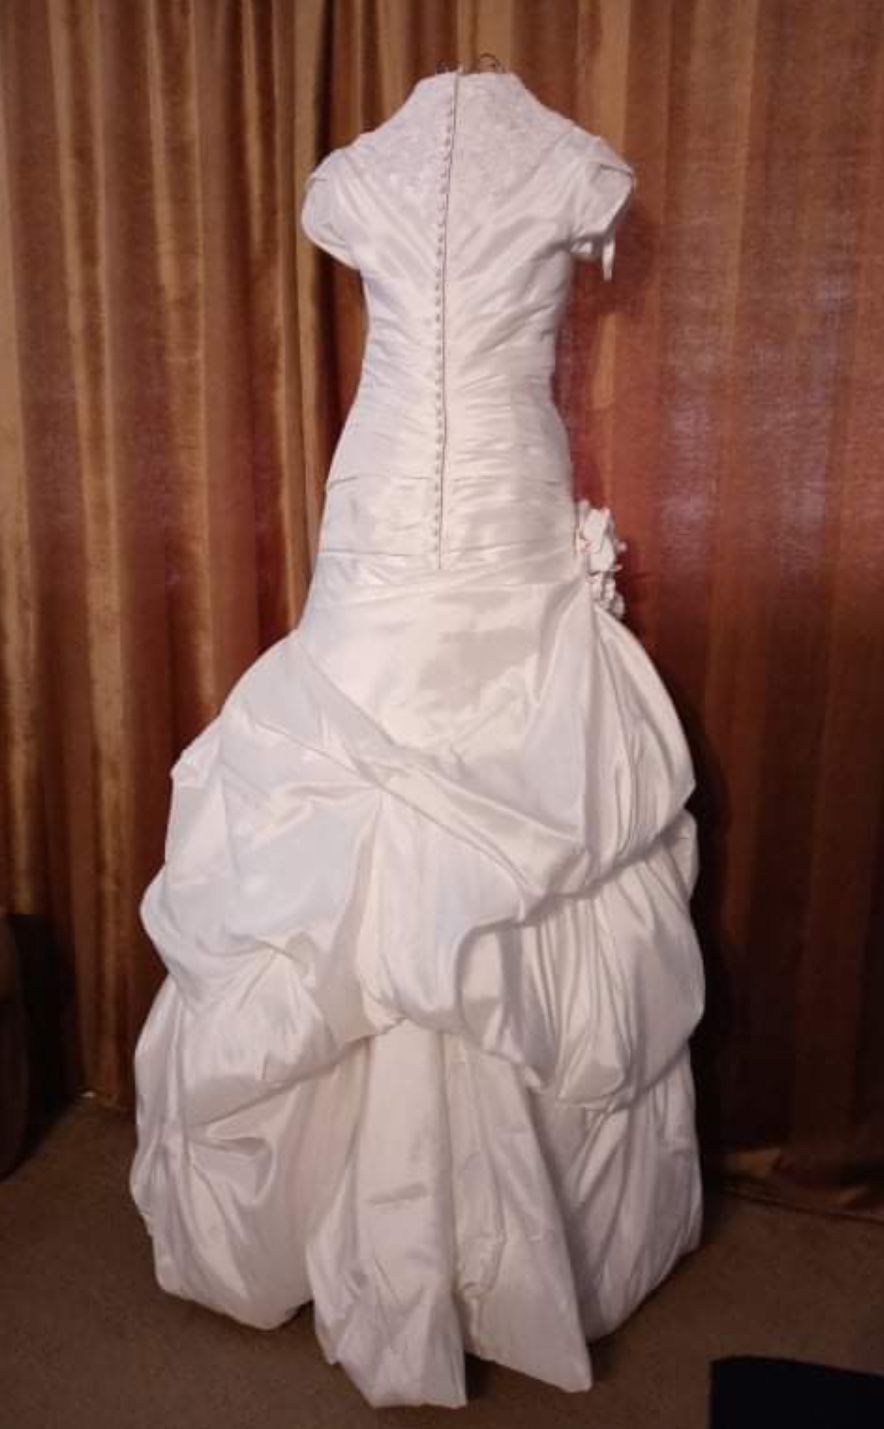 Wedding modern, romantic revival in this spectacular wedding dress. Perfectly clean. Size 6